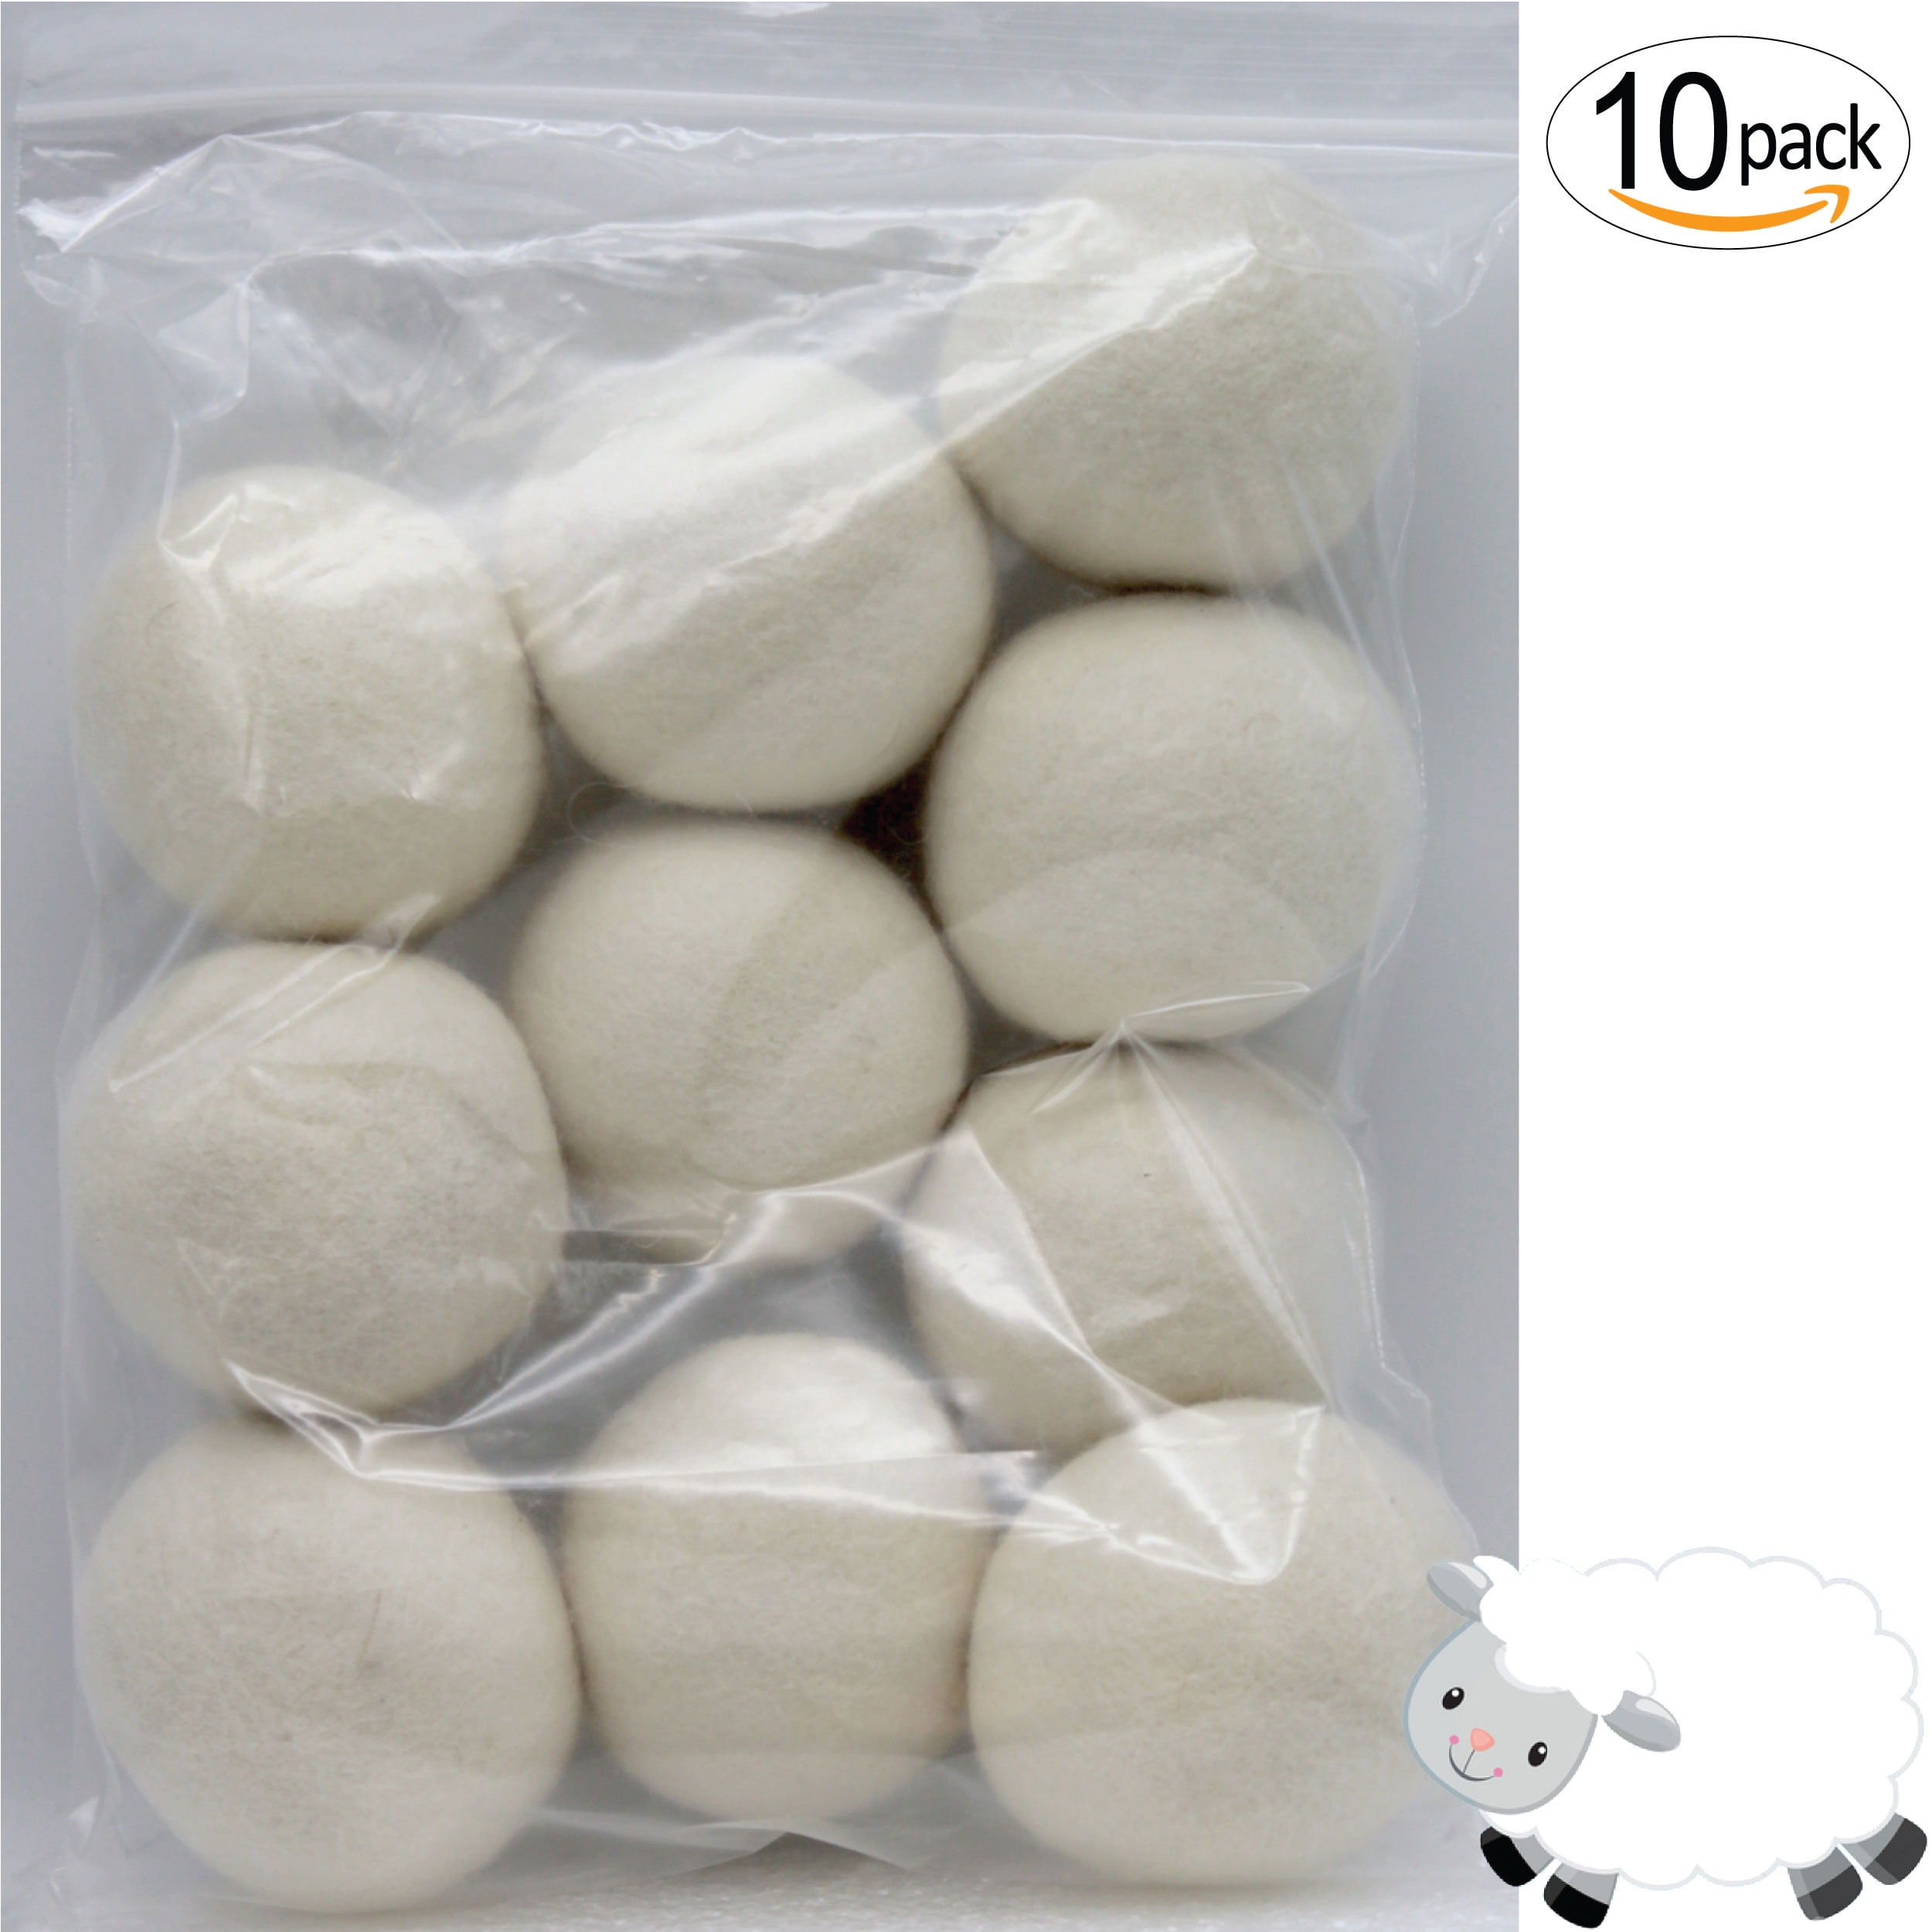 Eco Friendly,Save Money 6 Wooly Tumbler Dryer Balls 100% Pure New Zealand Wool 